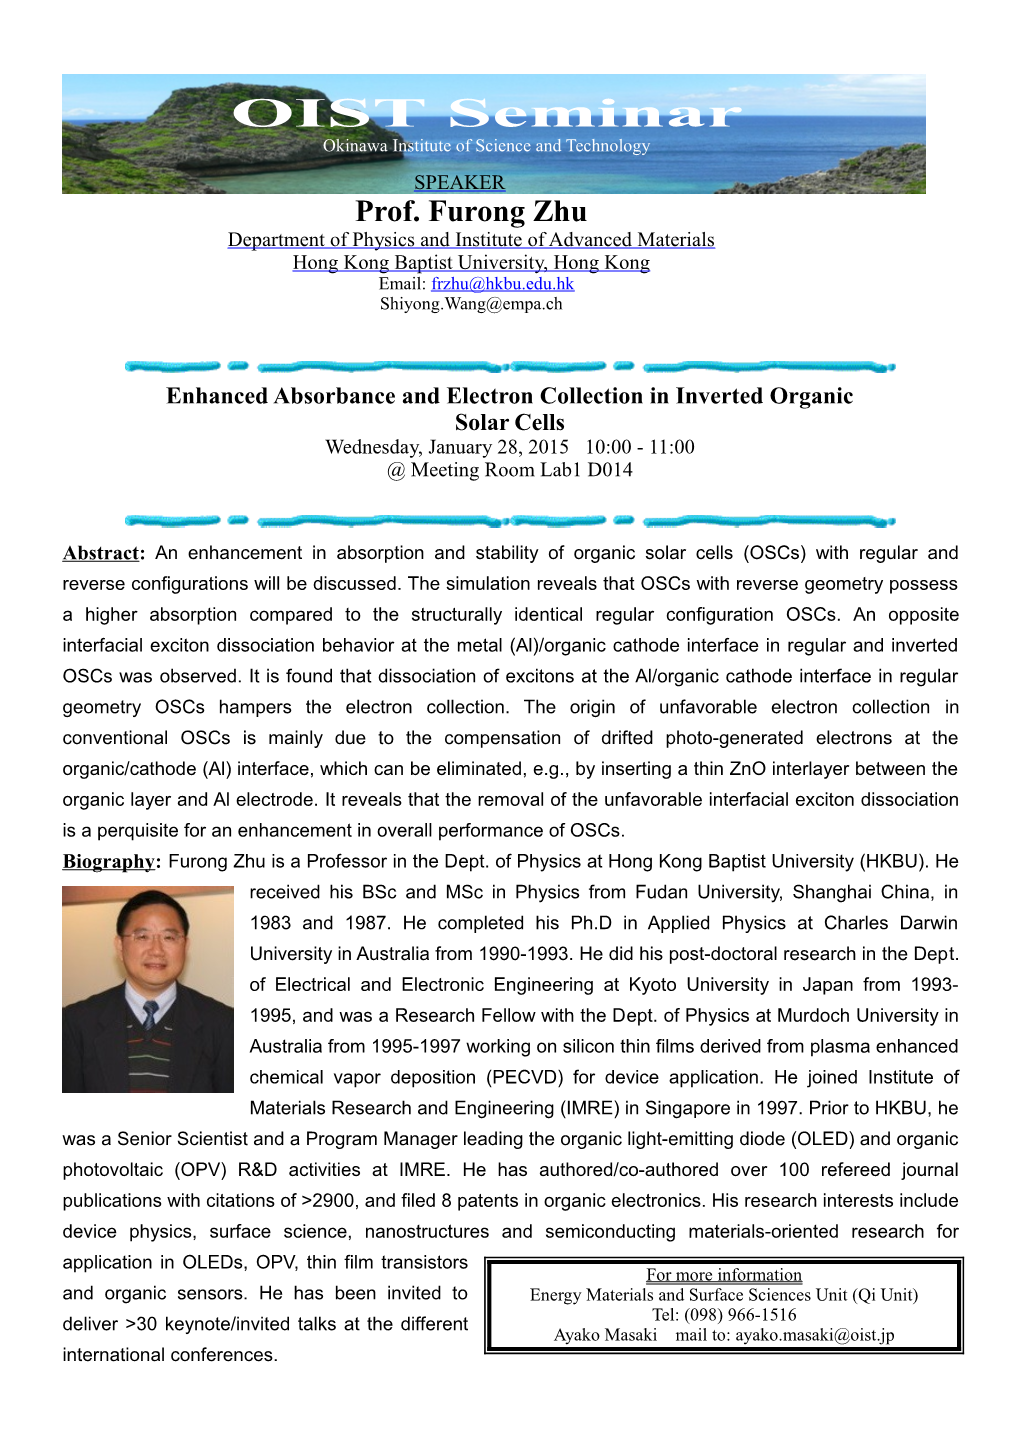 Abstract: an Enhancement in Absorption and Stability of Organic Solar Cells (Oscs) With